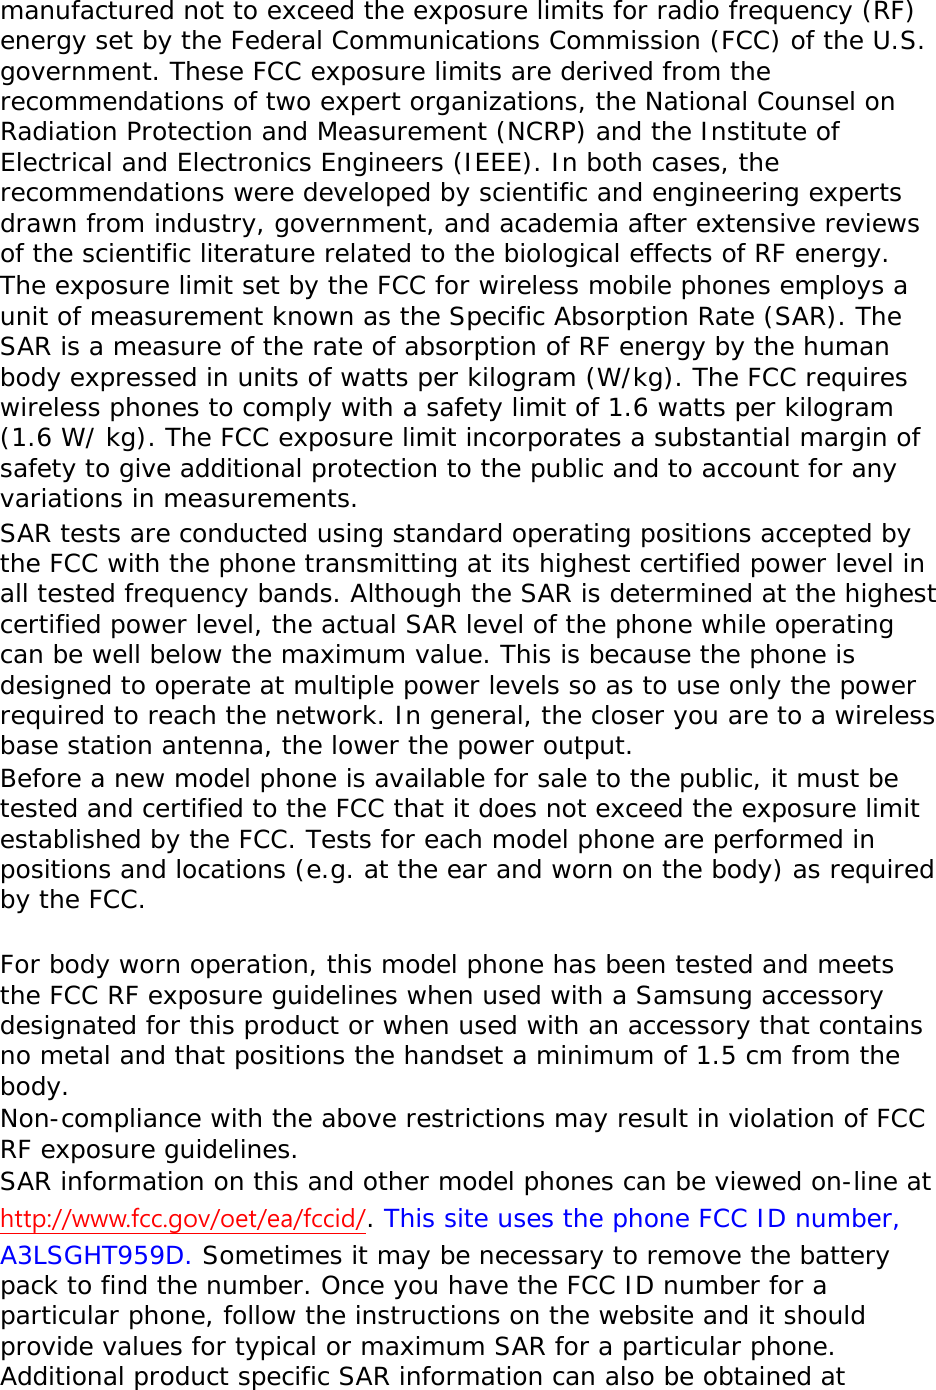 manufactured not to exceed the exposure limits for radio frequency (RF) energy set by the Federal Communications Commission (FCC) of the U.S. government. These FCC exposure limits are derived from the recommendations of two expert organizations, the National Counsel on Radiation Protection and Measurement (NCRP) and the Institute of Electrical and Electronics Engineers (IEEE). In both cases, the recommendations were developed by scientific and engineering experts drawn from industry, government, and academia after extensive reviews of the scientific literature related to the biological effects of RF energy. The exposure limit set by the FCC for wireless mobile phones employs a unit of measurement known as the Specific Absorption Rate (SAR). The SAR is a measure of the rate of absorption of RF energy by the human body expressed in units of watts per kilogram (W/kg). The FCC requires wireless phones to comply with a safety limit of 1.6 watts per kilogram (1.6 W/ kg). The FCC exposure limit incorporates a substantial margin of safety to give additional protection to the public and to account for any variations in measurements. SAR tests are conducted using standard operating positions accepted by the FCC with the phone transmitting at its highest certified power level in all tested frequency bands. Although the SAR is determined at the highest certified power level, the actual SAR level of the phone while operating can be well below the maximum value. This is because the phone is designed to operate at multiple power levels so as to use only the power required to reach the network. In general, the closer you are to a wireless base station antenna, the lower the power output. Before a new model phone is available for sale to the public, it must be tested and certified to the FCC that it does not exceed the exposure limit established by the FCC. Tests for each model phone are performed in positions and locations (e.g. at the ear and worn on the body) as required by the FCC.    For body worn operation, this model phone has been tested and meets the FCC RF exposure guidelines when used with a Samsung accessory designated for this product or when used with an accessory that contains no metal and that positions the handset a minimum of 1.5 cm from the body.  Non-compliance with the above restrictions may result in violation of FCC RF exposure guidelines. SAR information on this and other model phones can be viewed on-line at http://www.fcc.gov/oet/ea/fccid/. This site uses the phone FCC ID number, A3LSGHT959D. Sometimes it may be necessary to remove the battery pack to find the number. Once you have the FCC ID number for a particular phone, follow the instructions on the website and it should provide values for typical or maximum SAR for a particular phone. Additional product specific SAR information can also be obtained at 